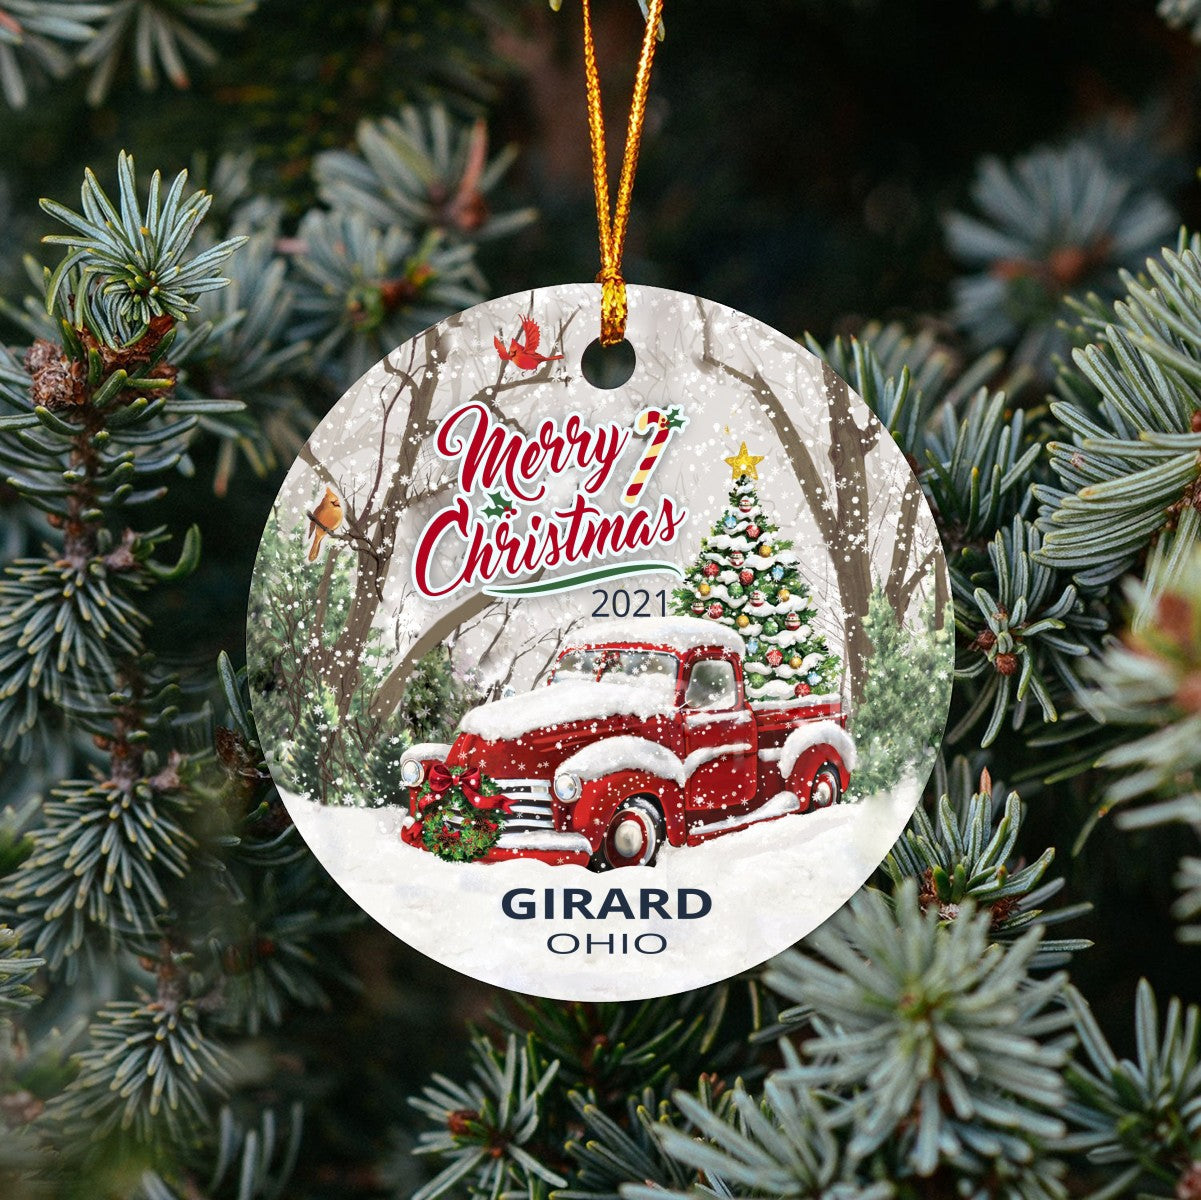 Christmas Tree Ornaments Girard - Ornament Customize With Name City And State Girard Ohio OH - Red Truck Xmas Ornaments 3'' Plastic Gift For Family, Friend And Housewarming